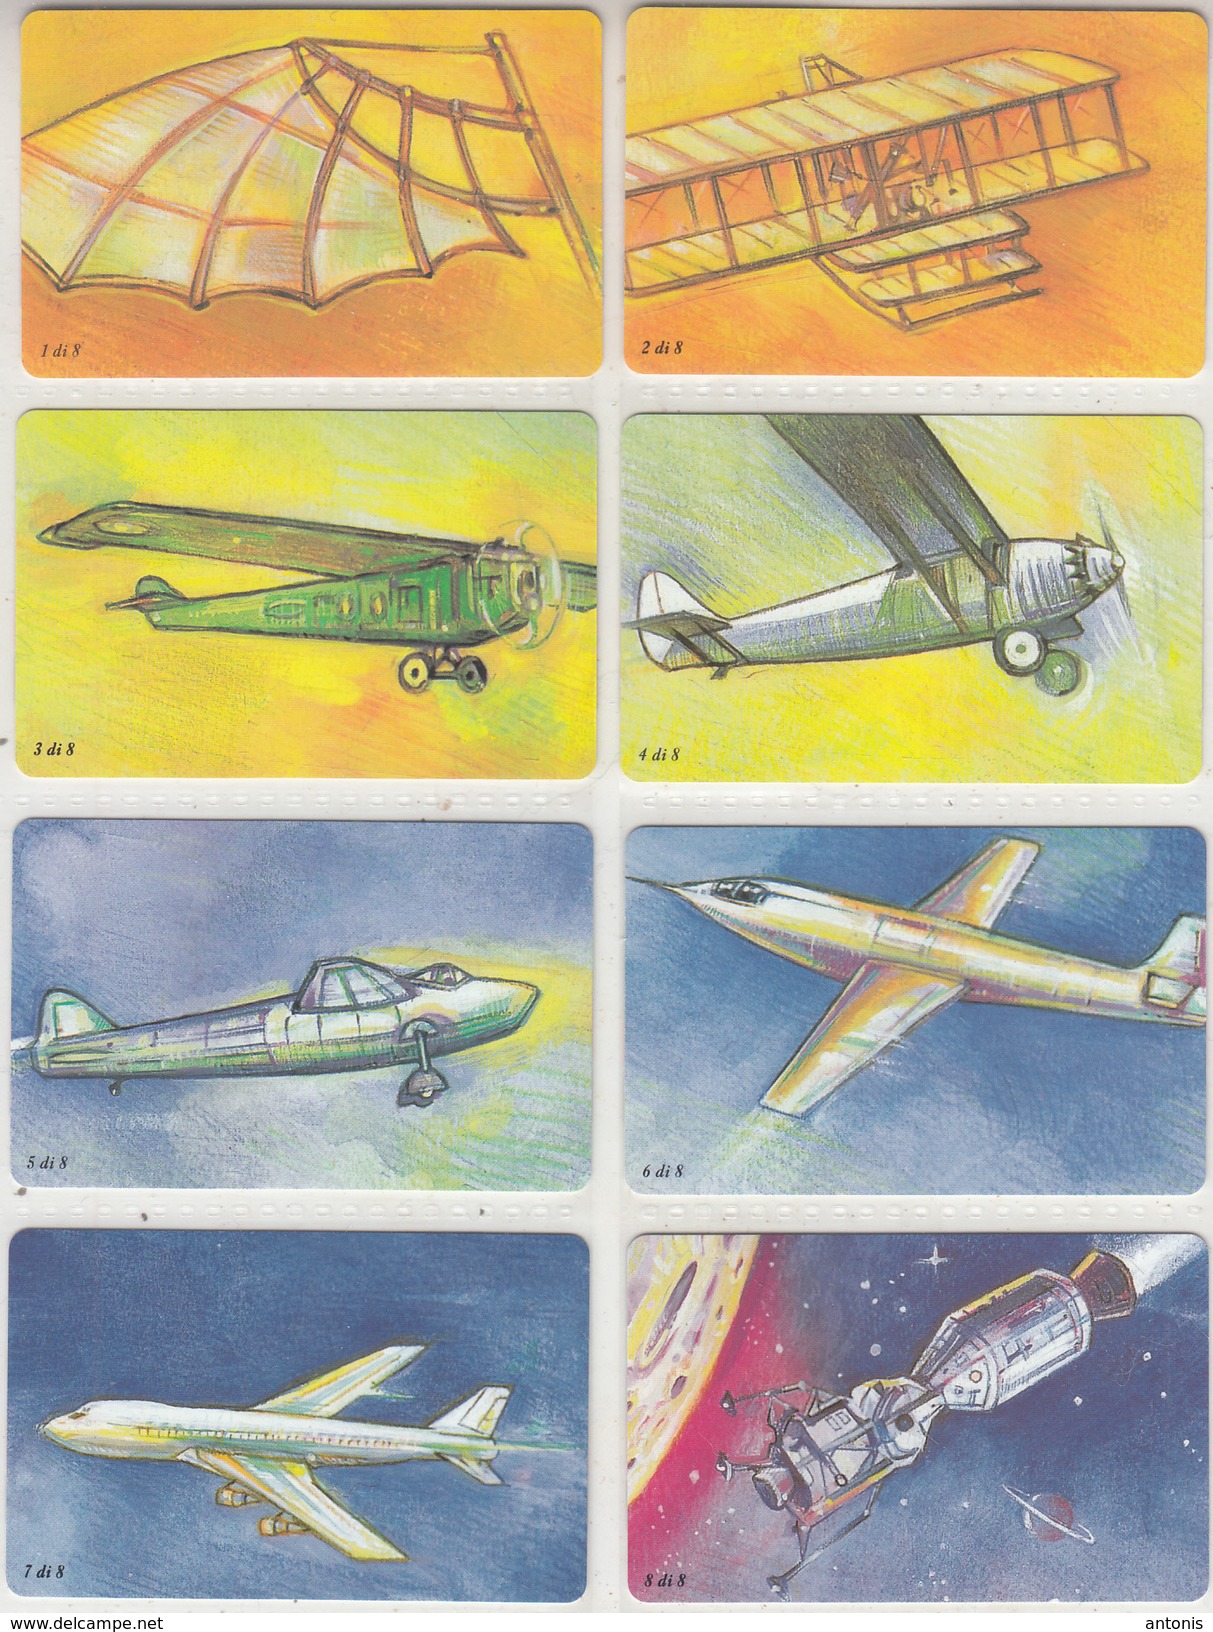 ITALY - Set Of 8 Cards, From The Wings To The Moon, Visual Flight Achievements, Tirage 90000, Exp.date 30/06/00, Mint - Public Advertising